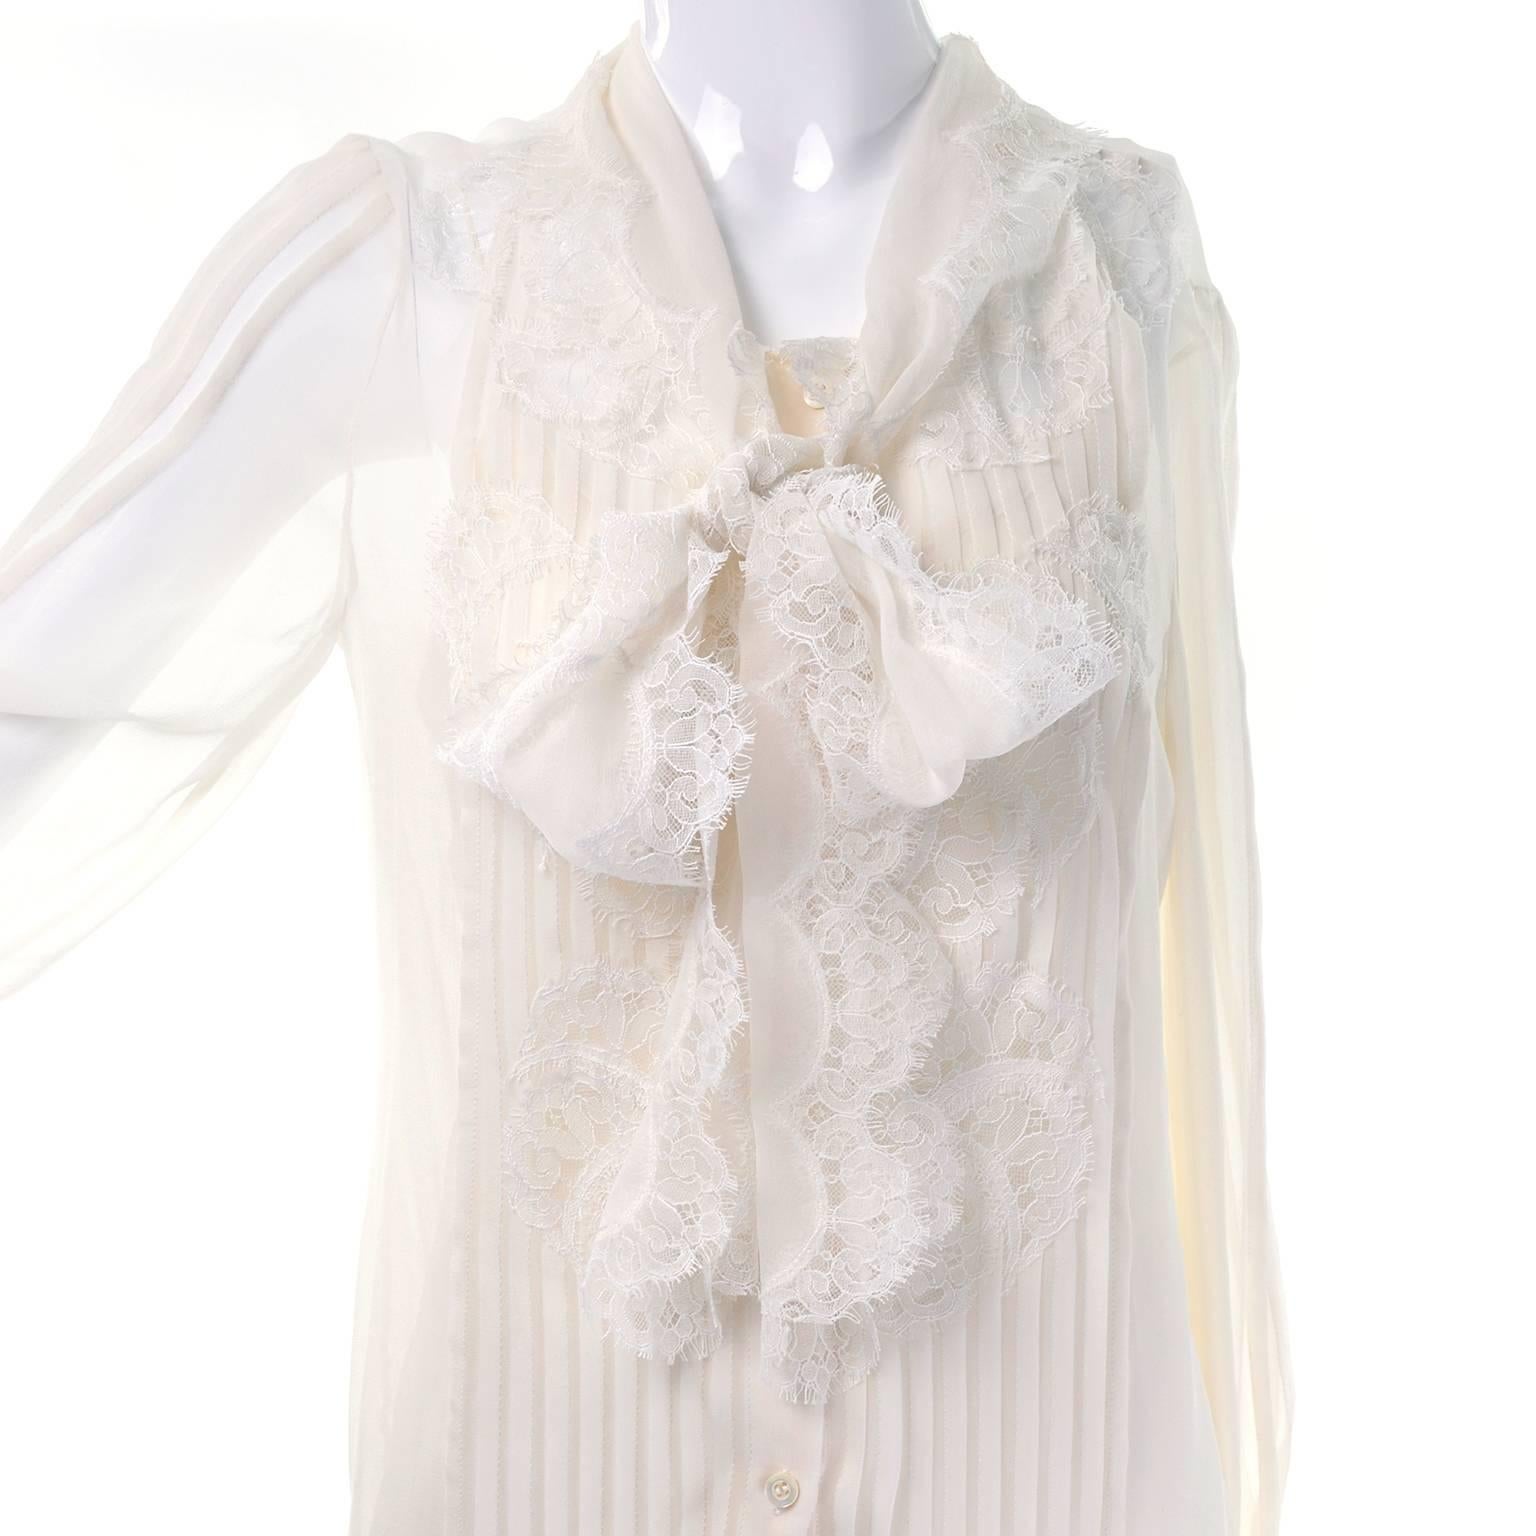 This is a gorgeous Oscar de la Renta sheer off white blouse with a lace pussy bow and matching camisole to wear underneath. This blouse has pleats along the front and down the sleeves. Marked as a size 8, and it is meant to be worn blousy.  This